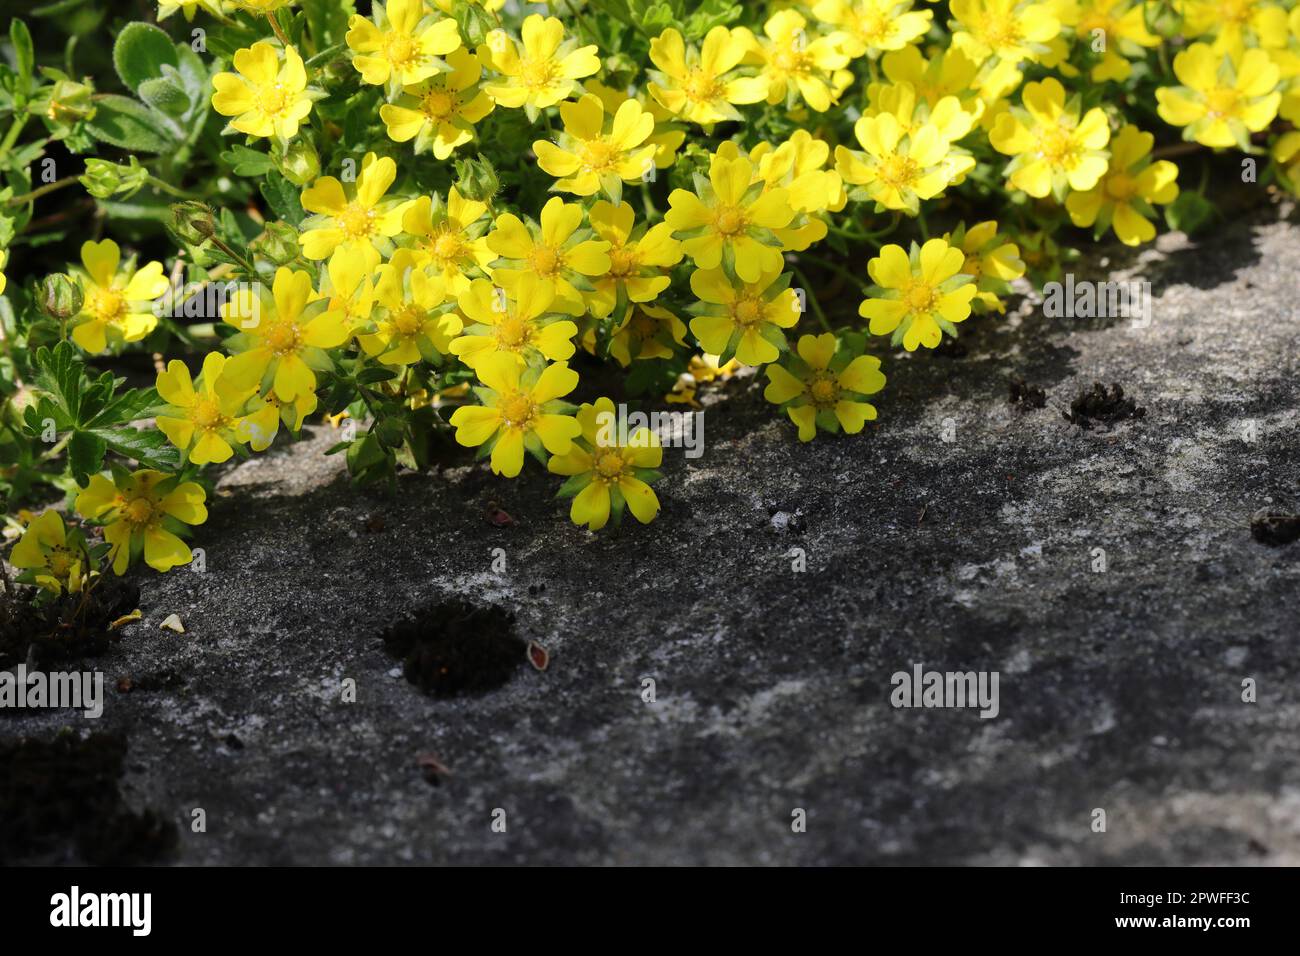 Bright yellow sunlit flowers of a spring cinquefoil stretch into a stony garden path, copy space, view from above Stock Photo